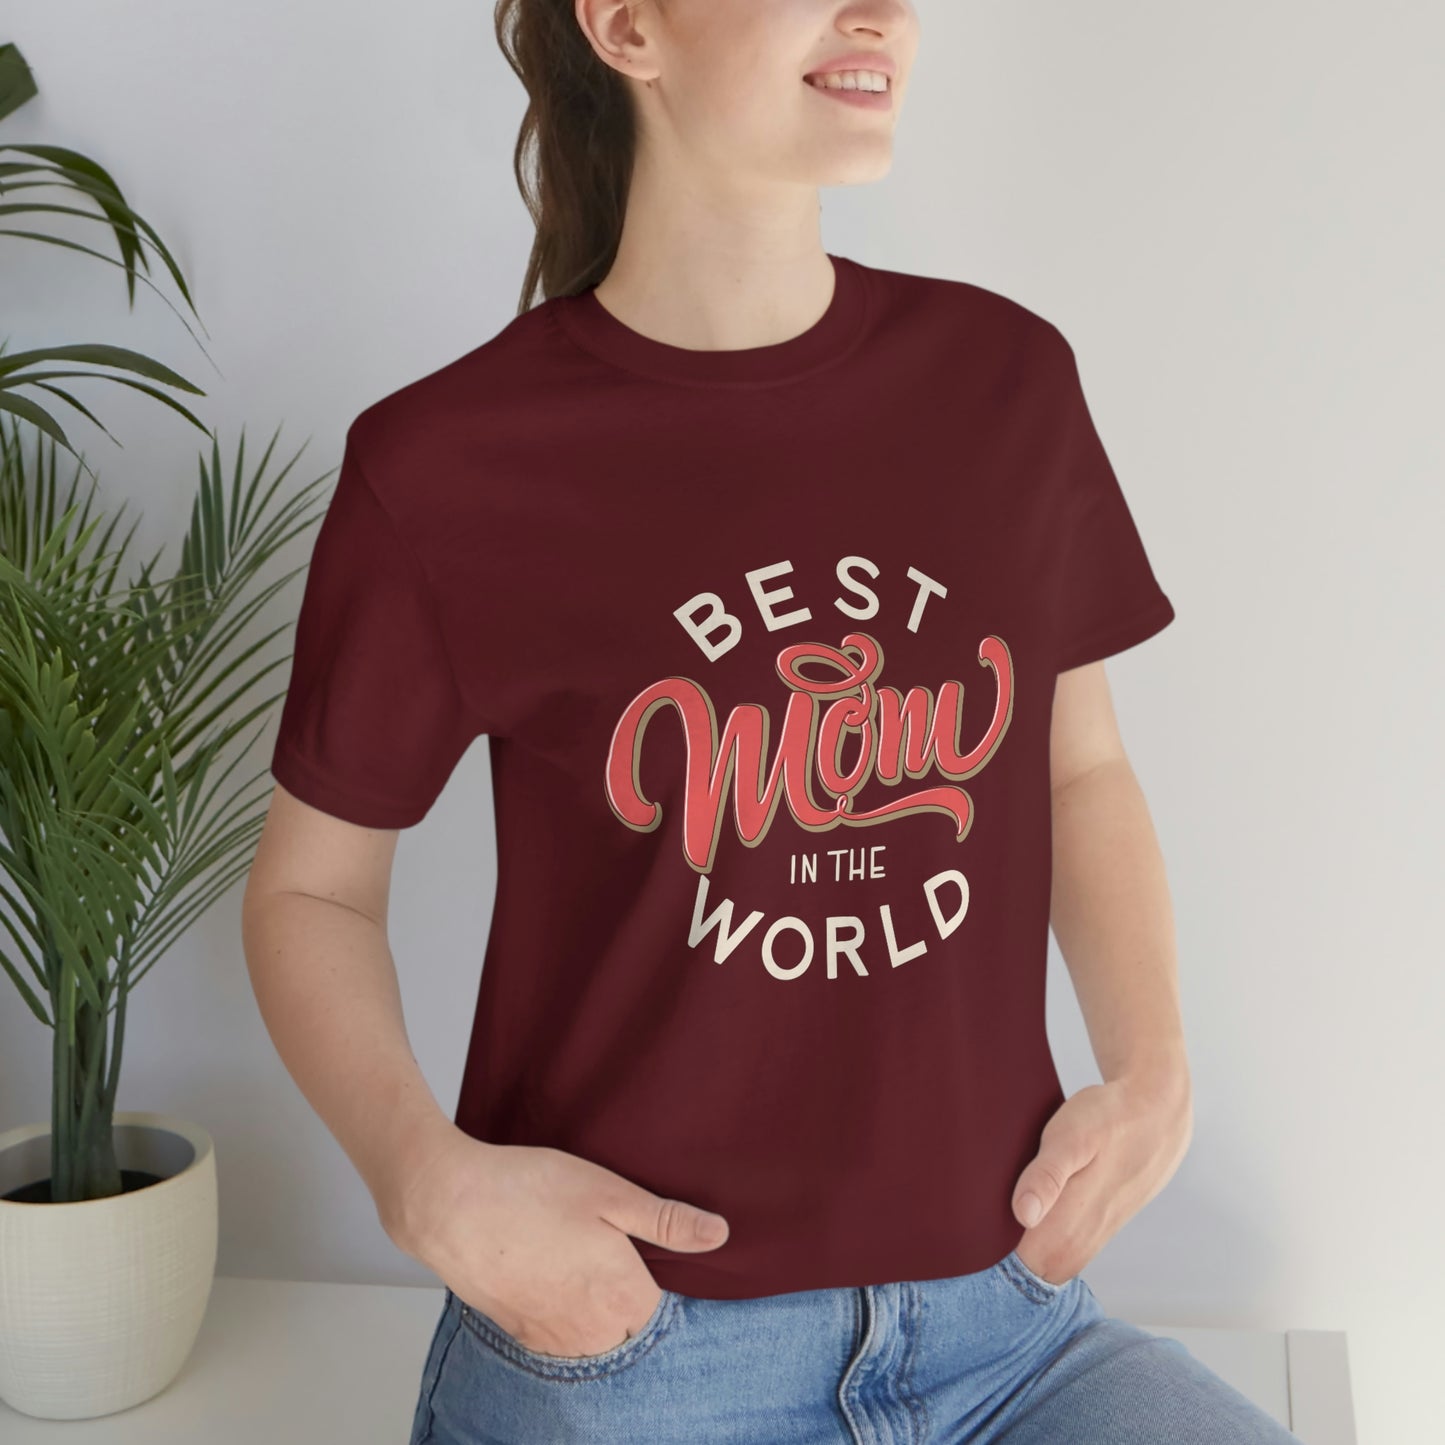 Best Mother's Day gift for Best Mom in the World. This maroon t-shirt is a versatile and stylish addition to any Mom's wardrobe.